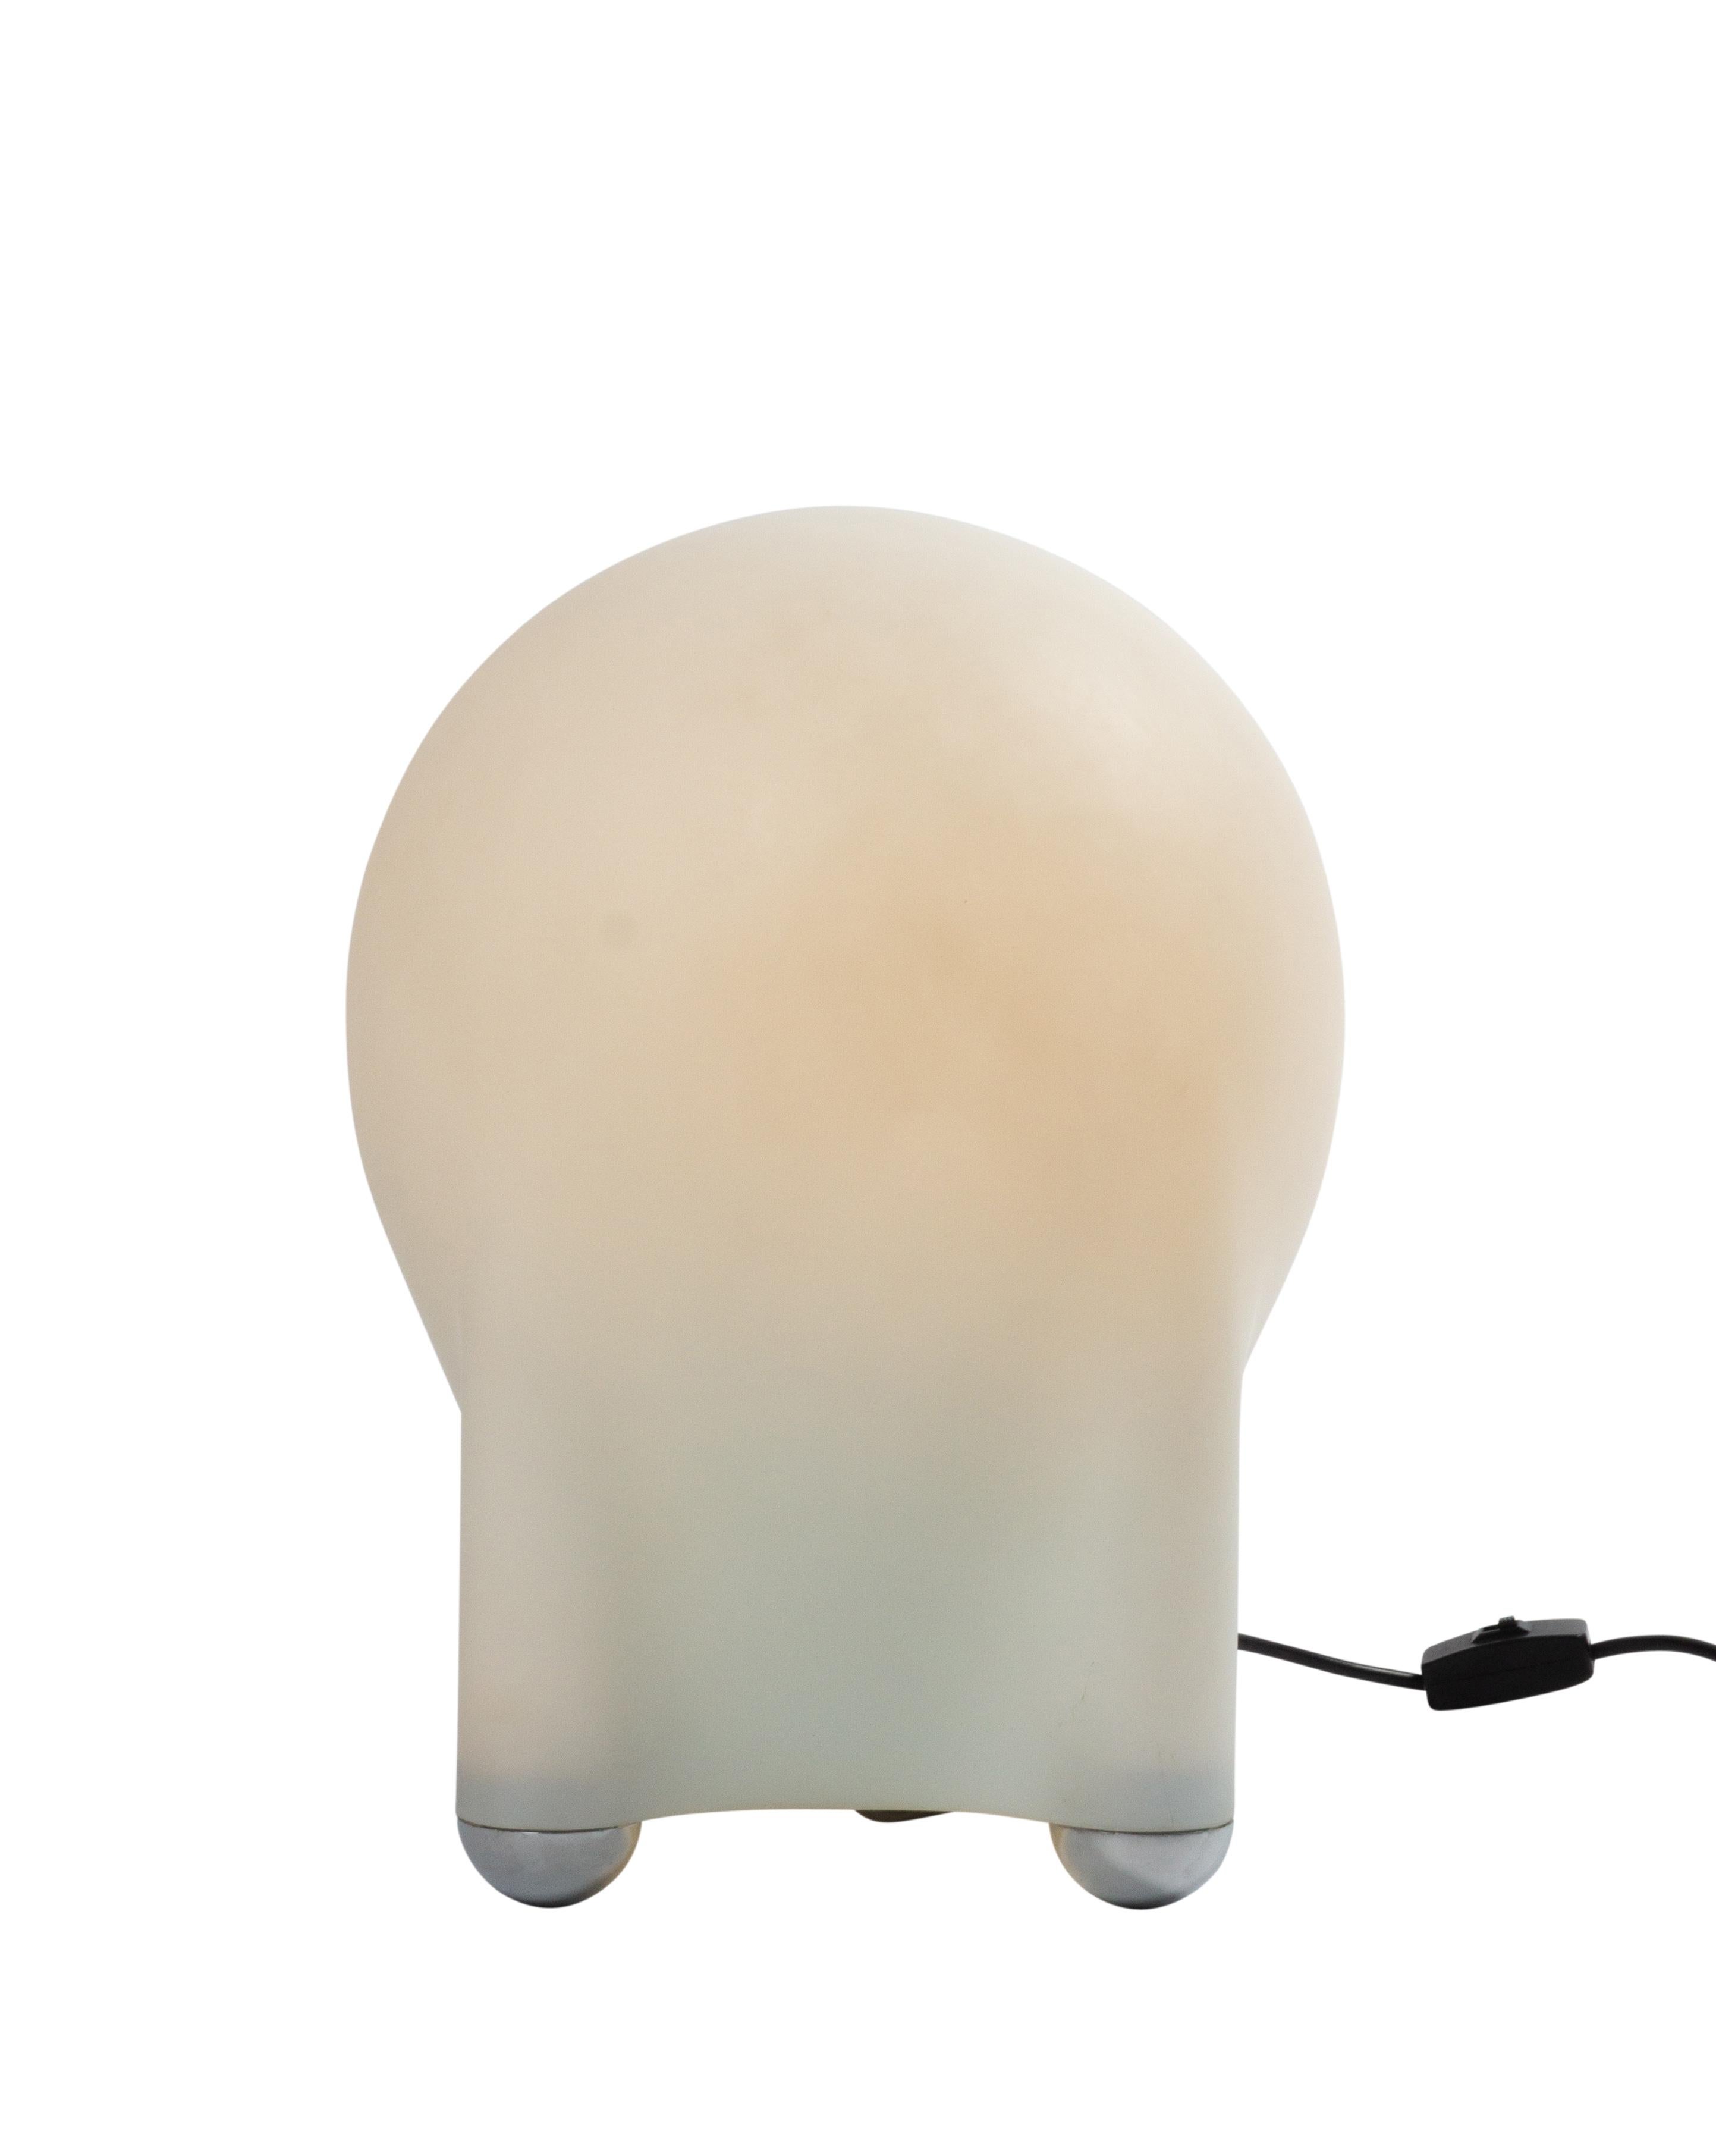 Tronconi by giotto stoppino ‘drop’ table lamp. Highly respected italiaan architect designed a few lights, this is one of his master piece. Sculptured beauty is made out of opaline glass and a metaal frame.

It has been chipped on the foot of the